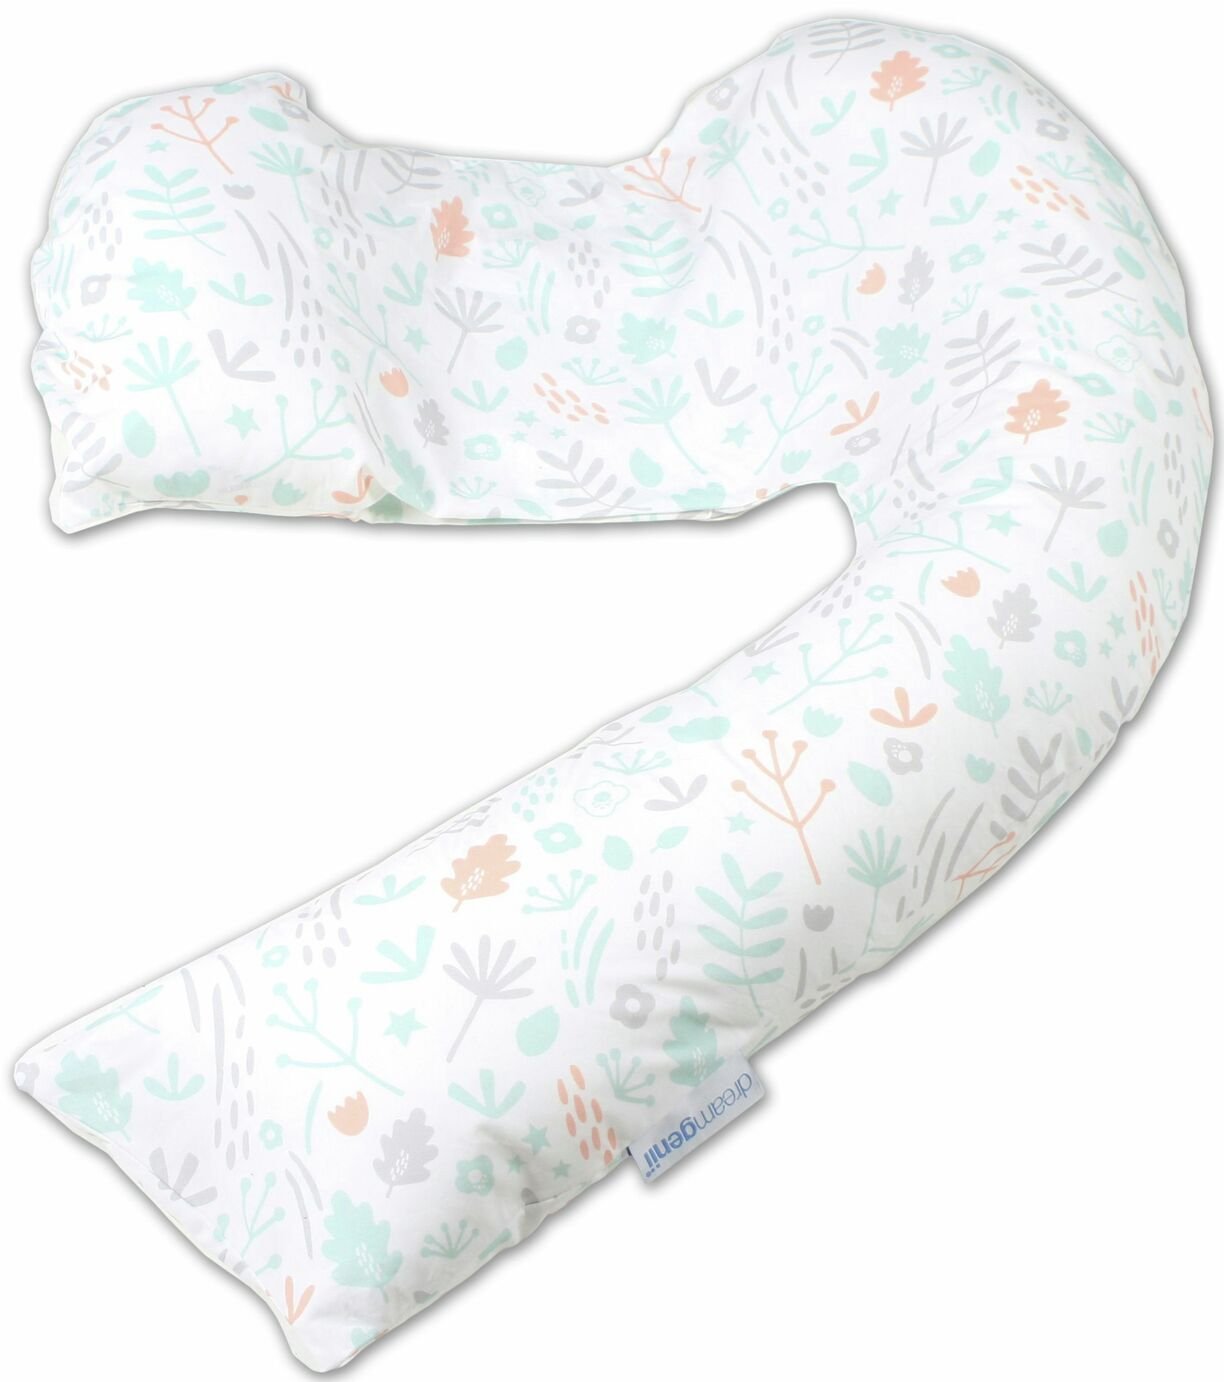 Dreamgenii Pregnancy Support and Baby Nursing Pillow Review